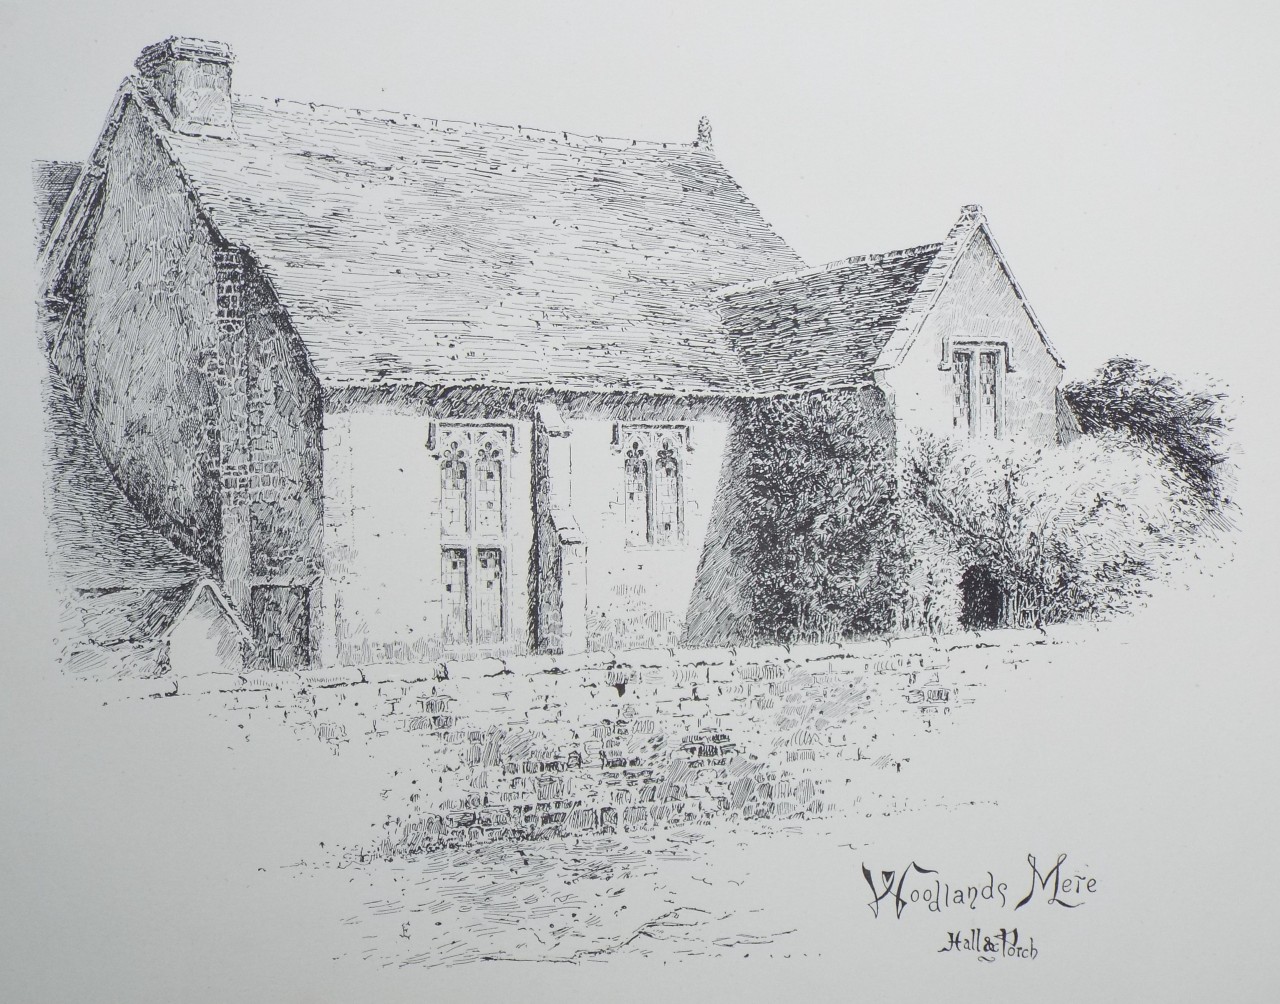 Lithograph - Woodlands Mere Hall & Porch